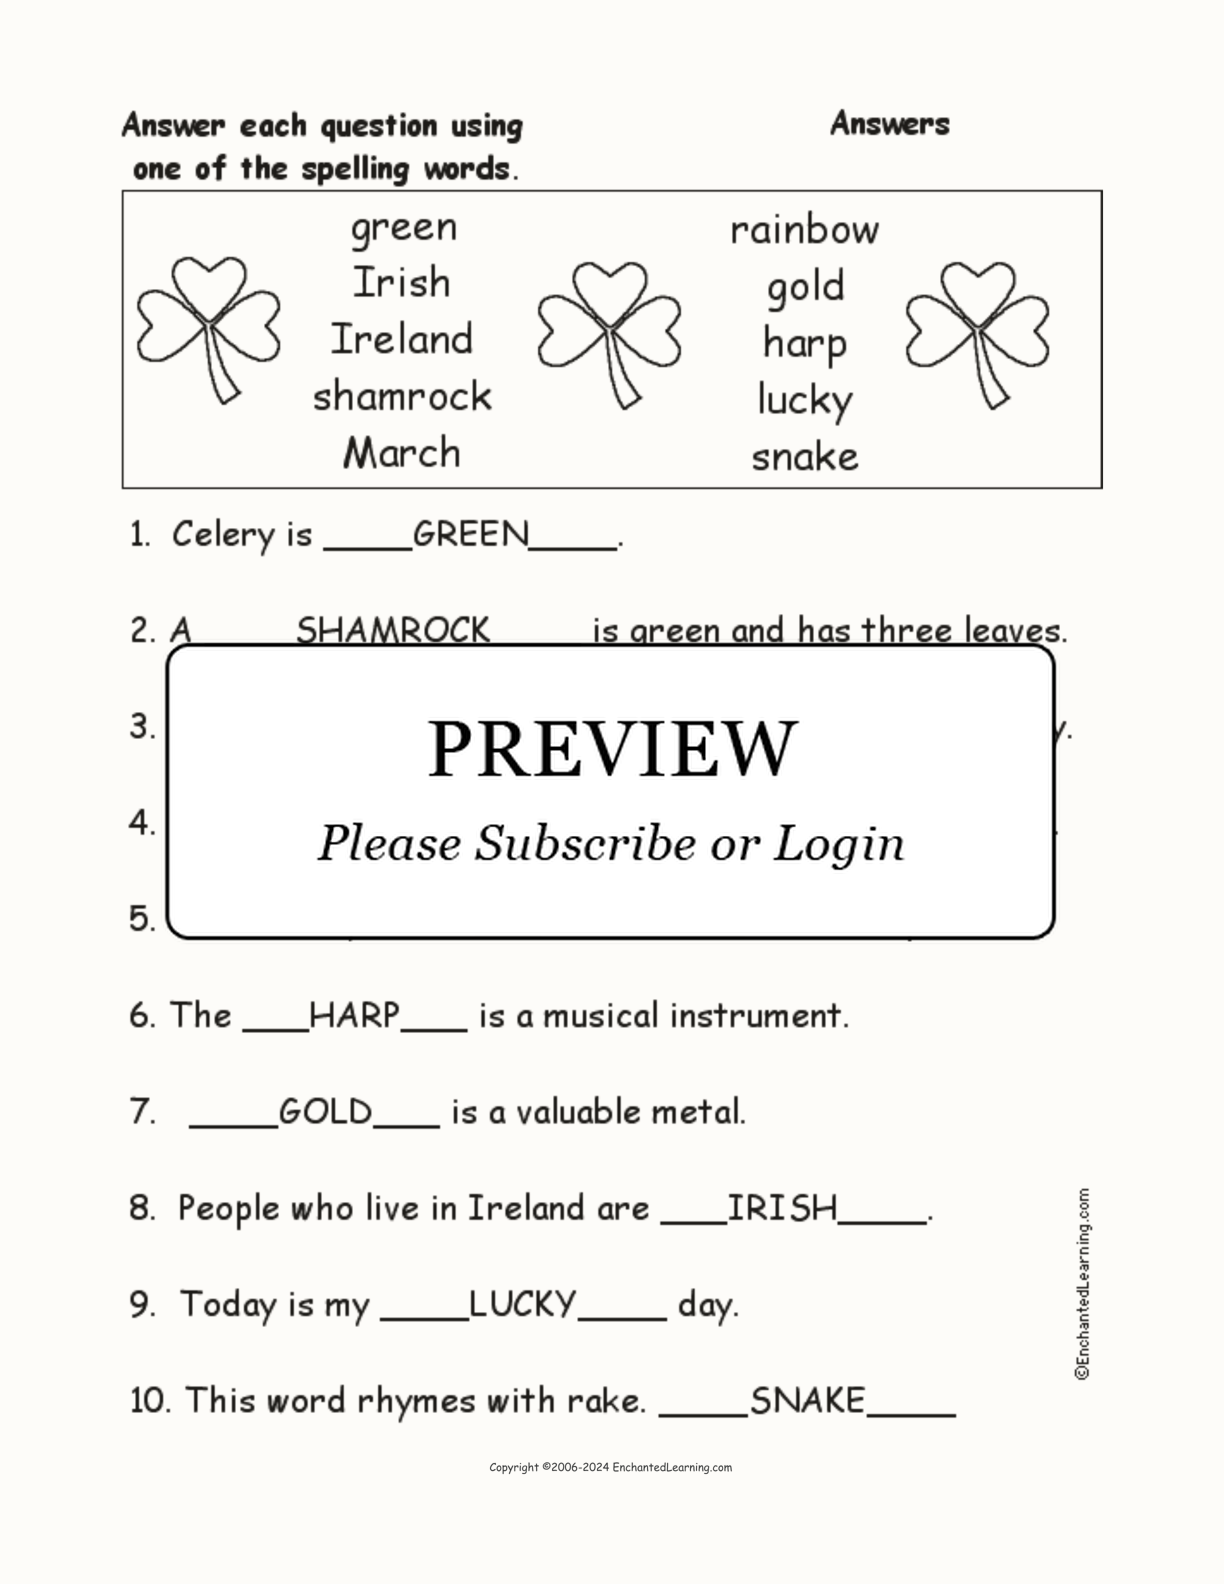 St. Patrick's Day Spelling Word Questions interactive worksheet page 2